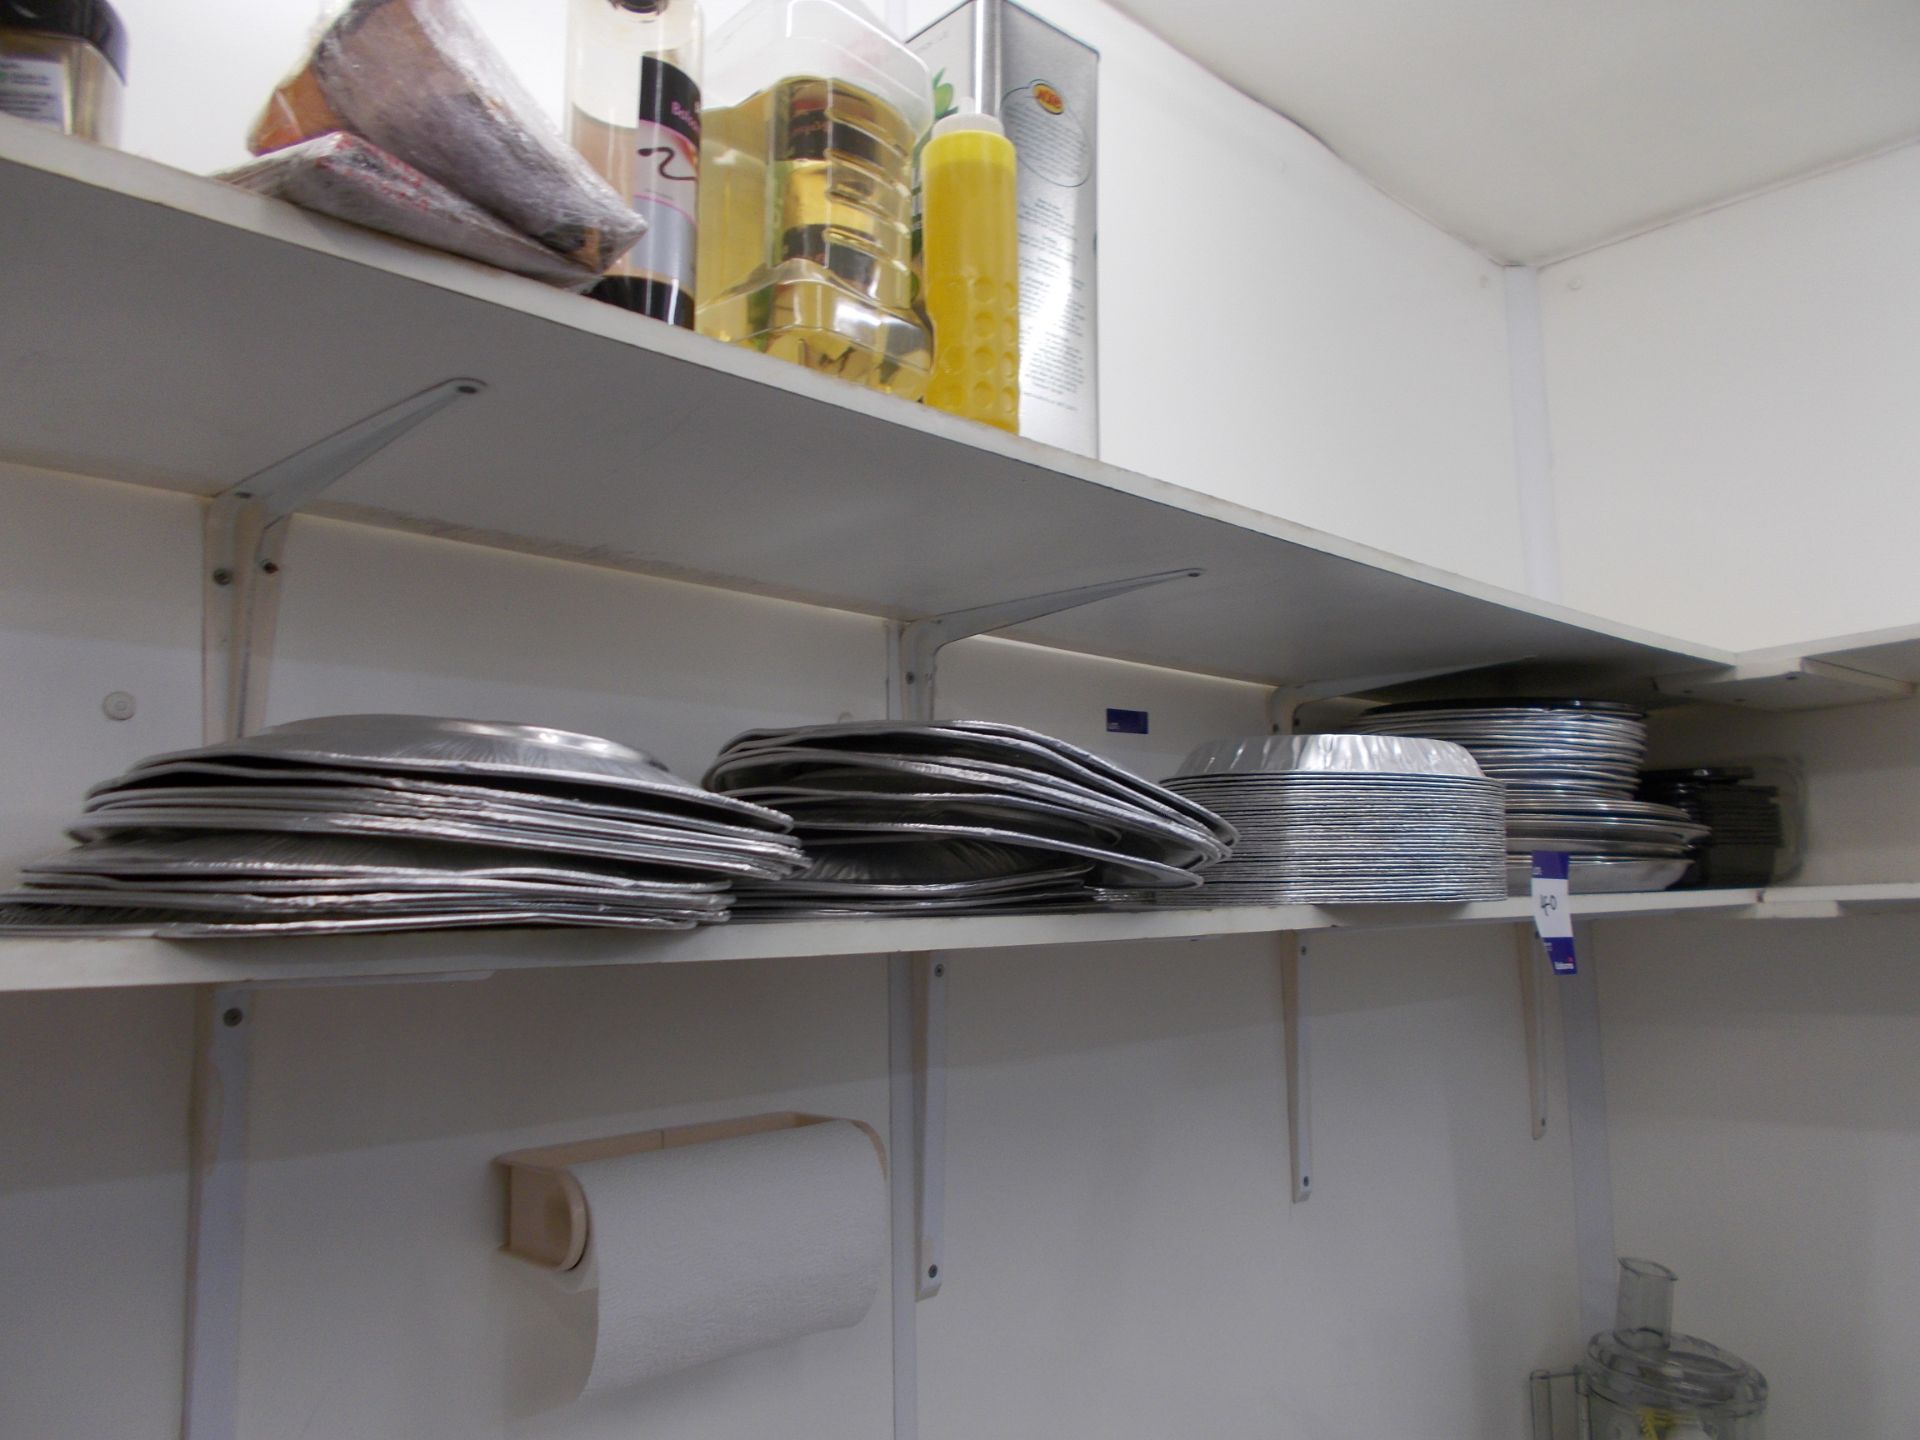 Large quantity of cutlery, trays etc to kitchen area (Shelving not included) - Image 3 of 3